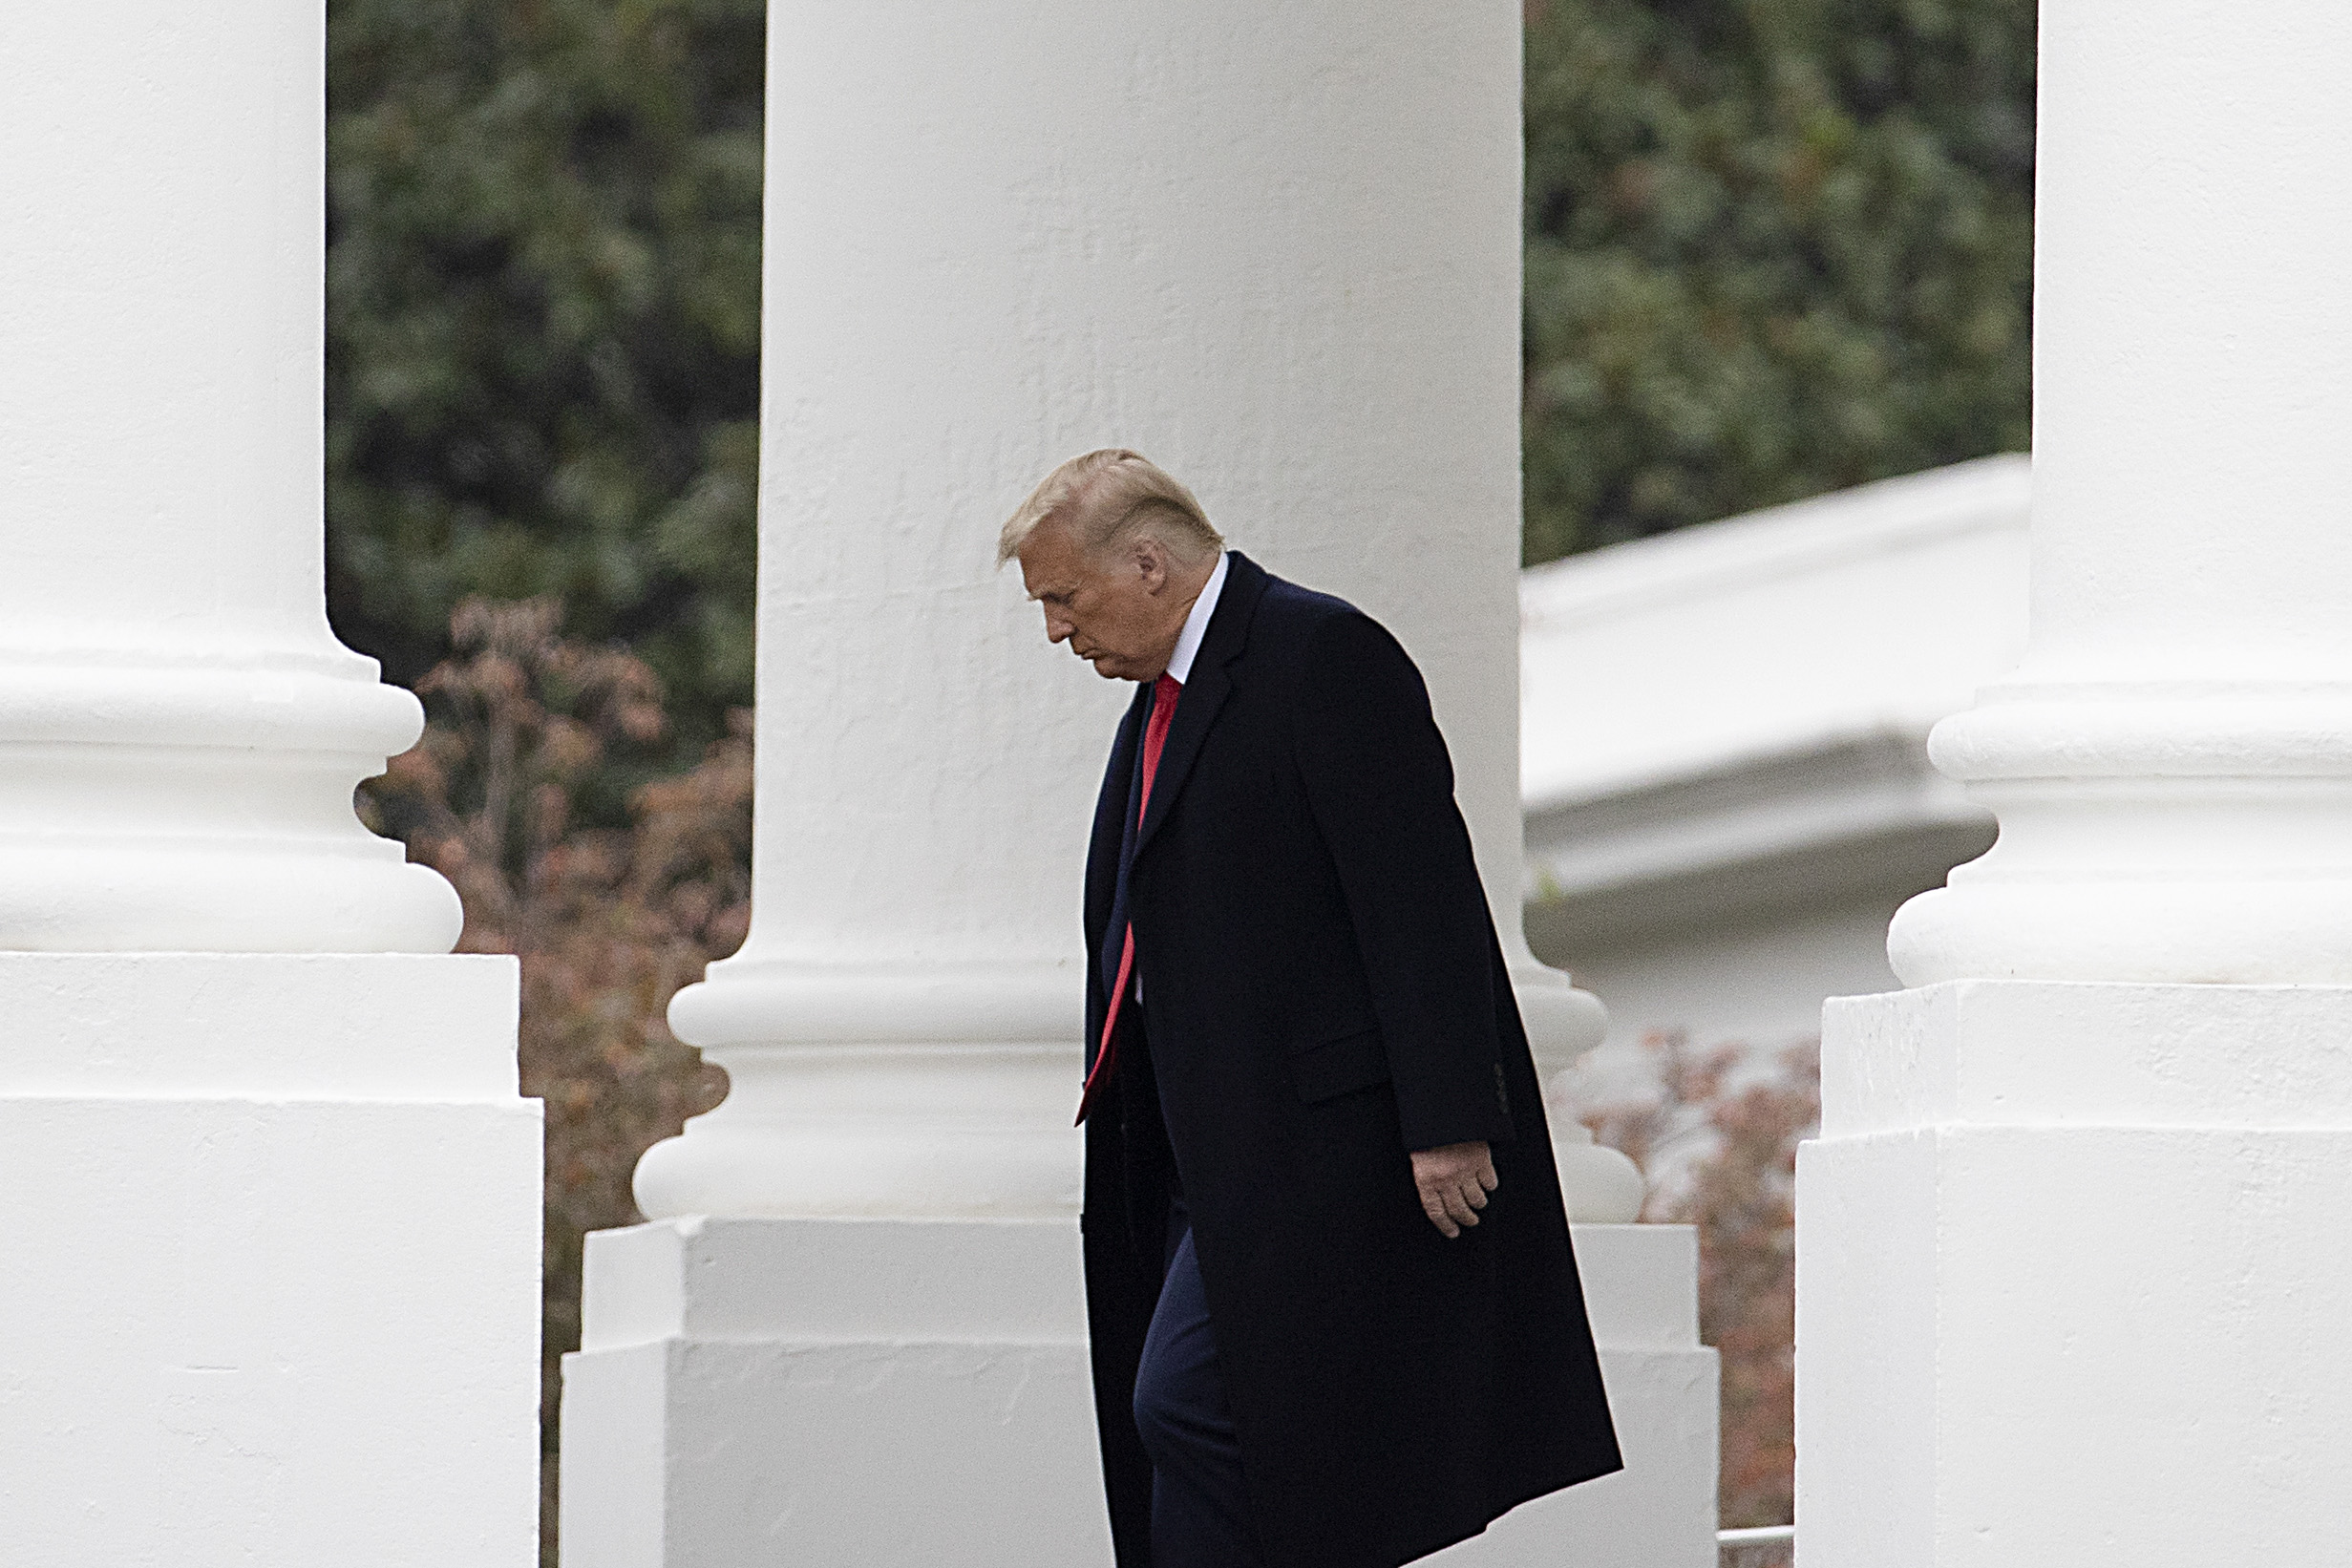 WASHINGTON, DC - OCTOBER 26: U.S. President Donald Trump walks out of White House on October 26, 2020 in Washington, DC. Trump plans to head to three campaign rallies in Pennsylvania this afternoon. (Photo by Tasos Katopodis/Getty Images)